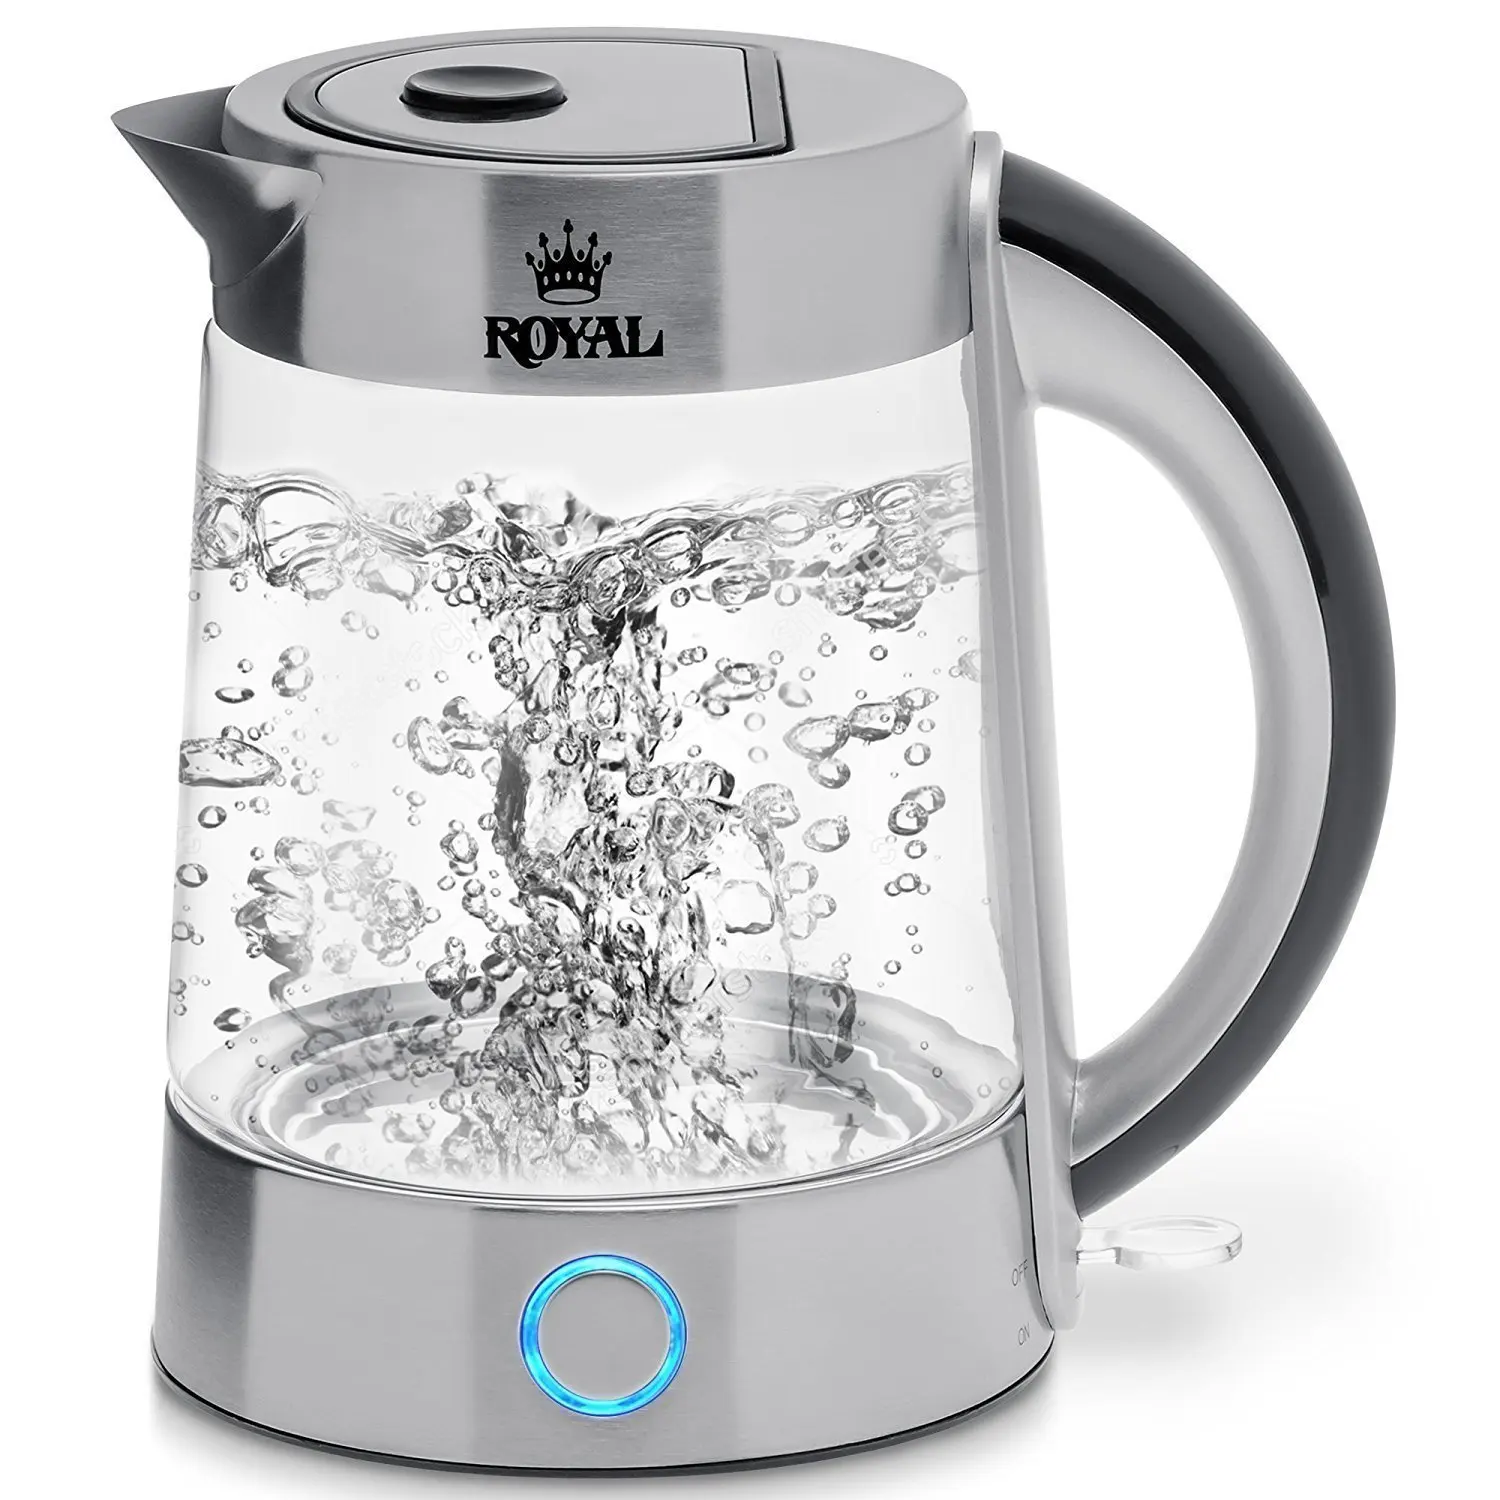 hot water heater for tea and coffee